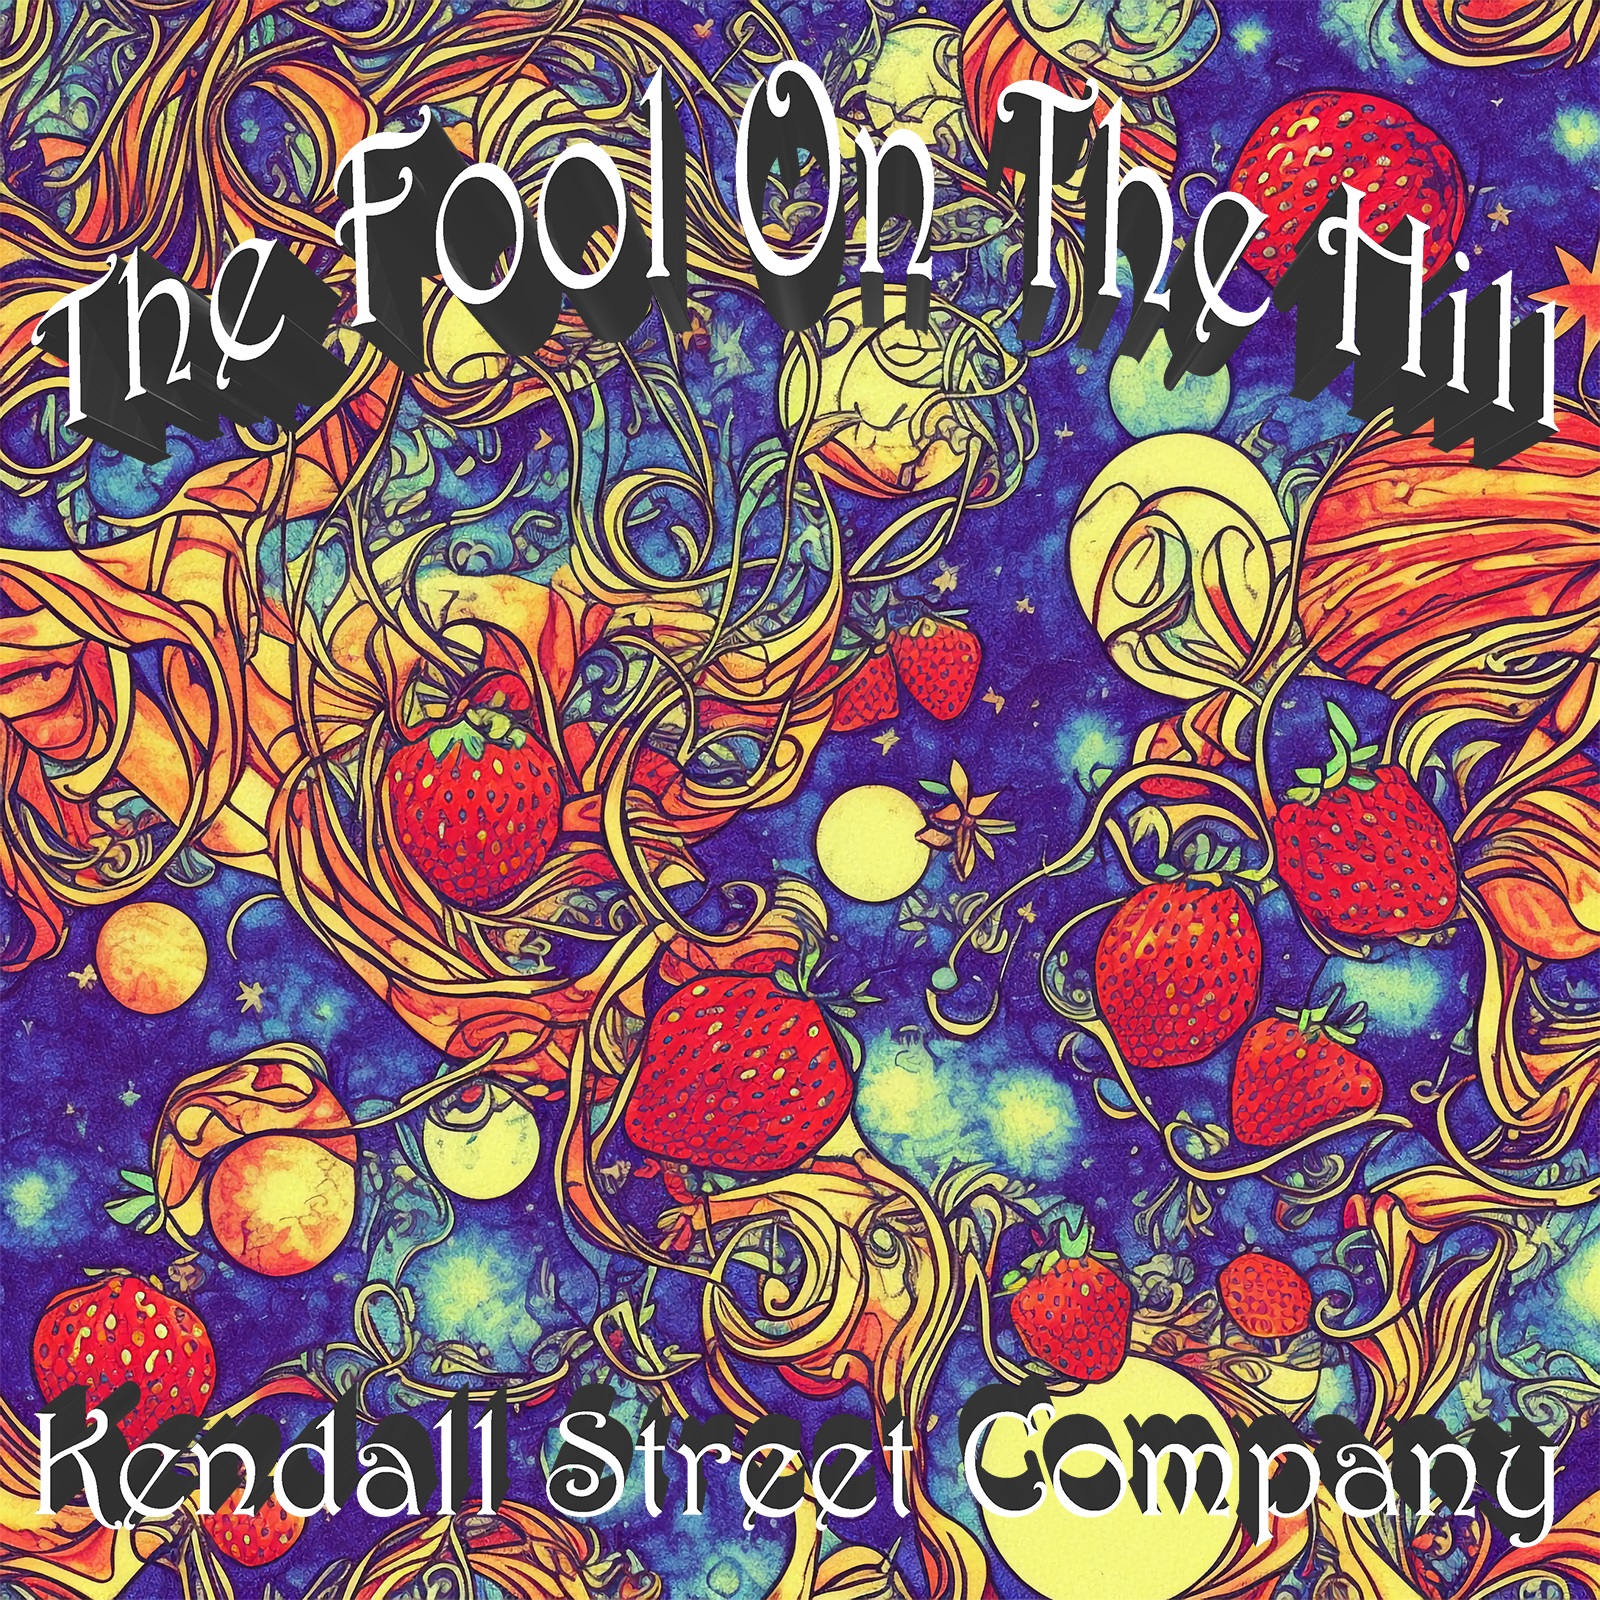 Kendall Street Company Release The Beatles’ “The Fool On The Hill”